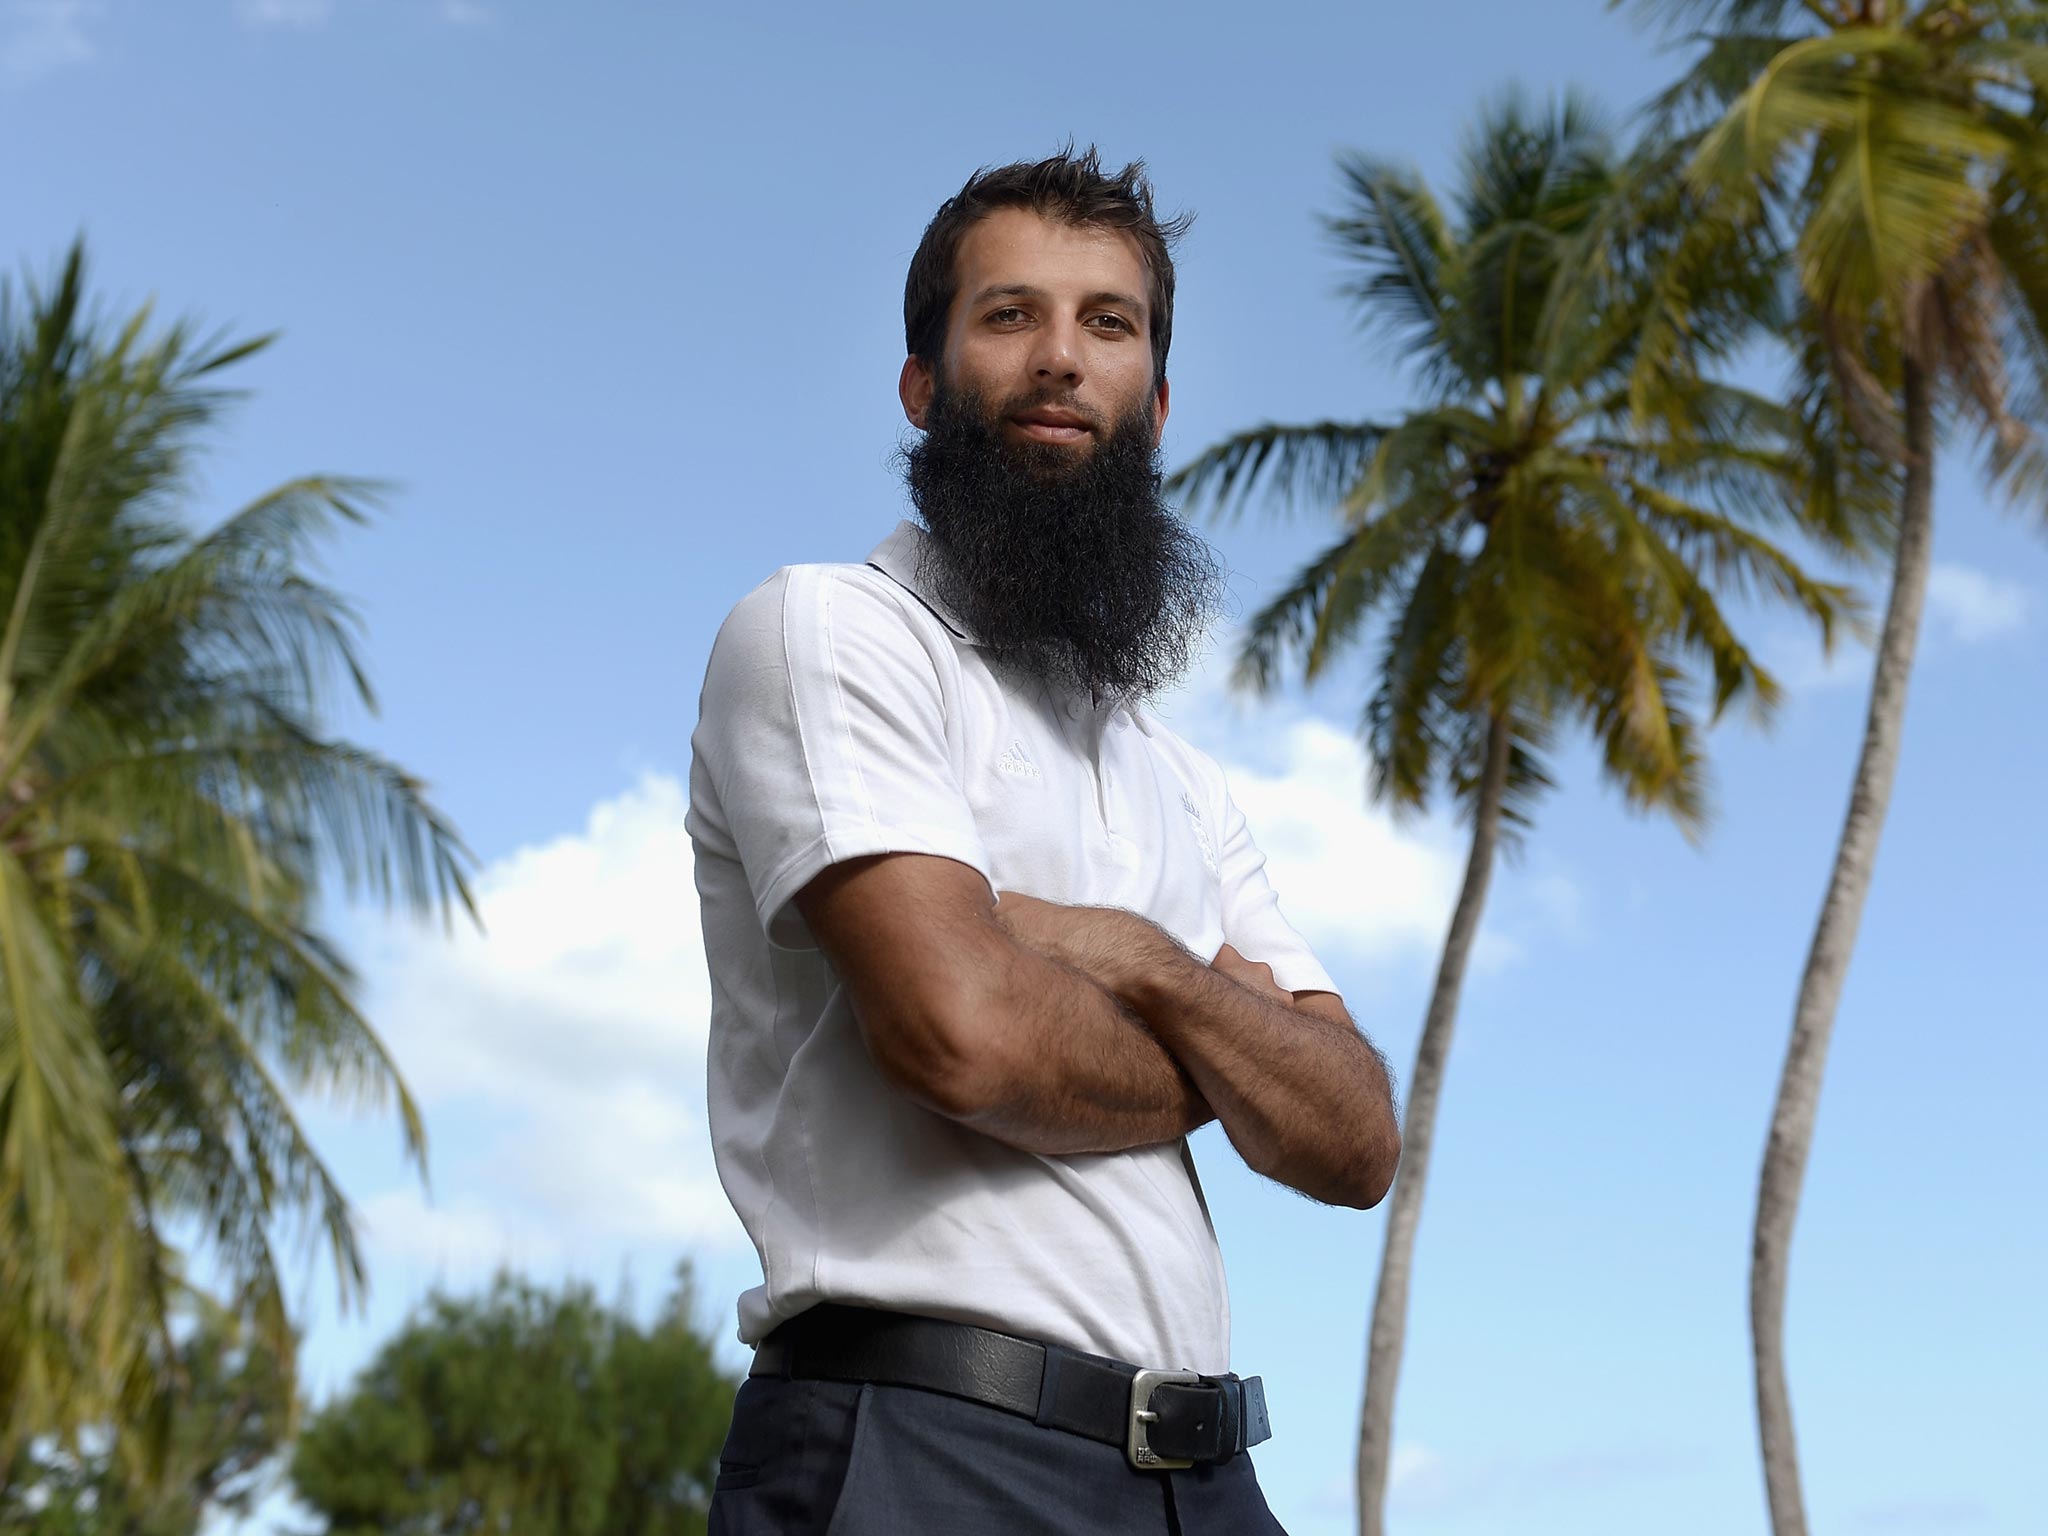 England opener Moeen Ali is hoping that he can take advantage of any opportunities that come his way following Joe Root's thumb injury